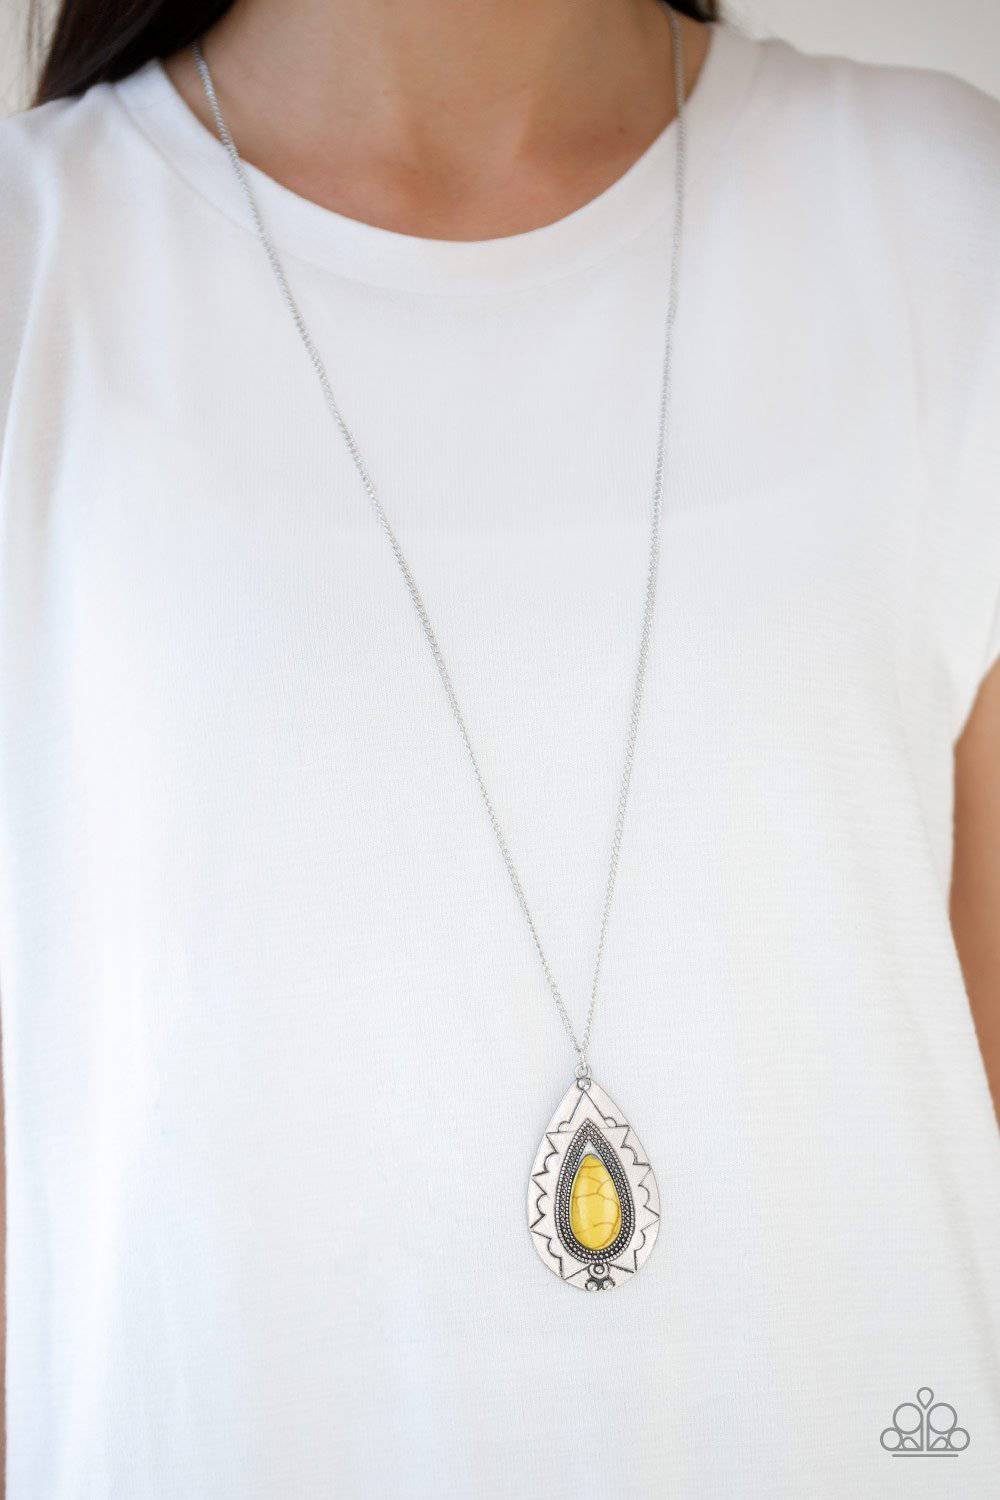 A128 - Sedona Solstice Stone Necklace by Paparazzi Accessories on Fancy5Fashion.com